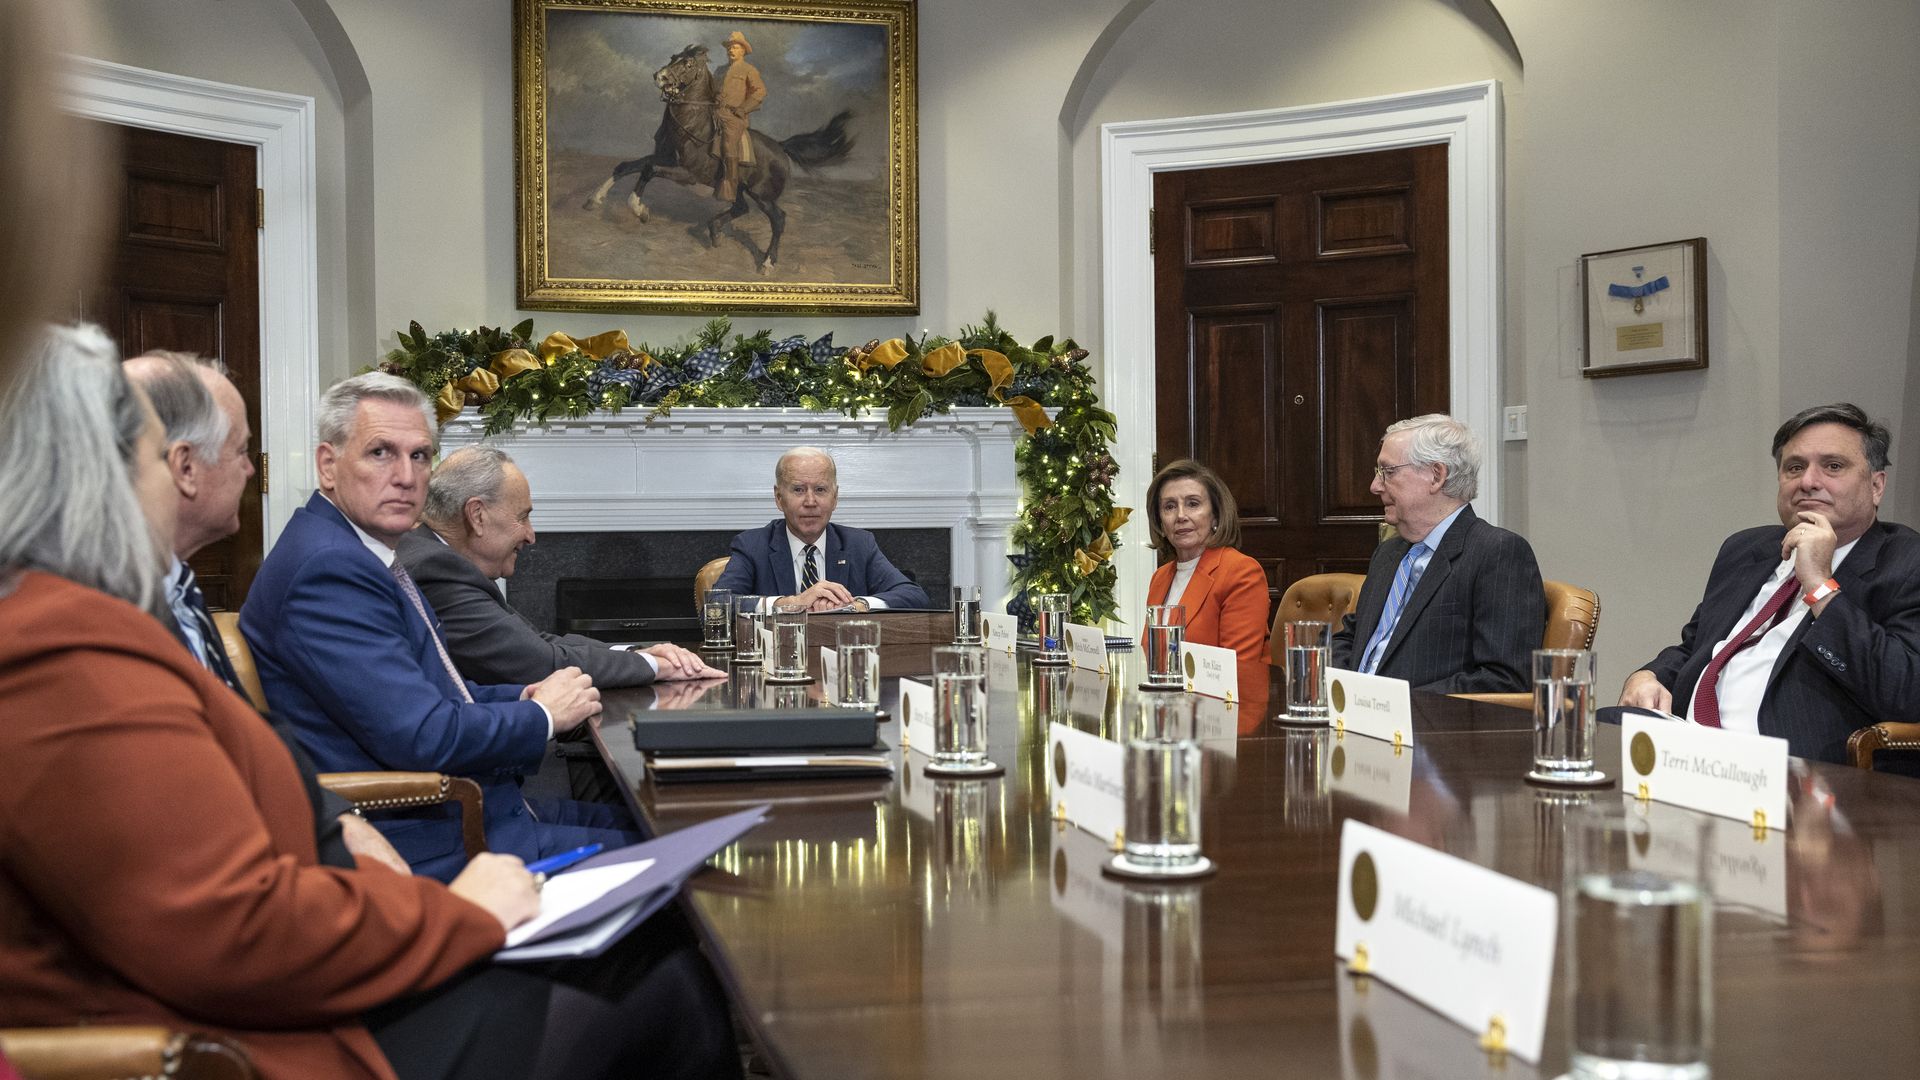 U.S. President Joe Biden meets with Congressional Leaders to discuss legislative priorities through the end of 2022, at the White House on November 29, 2022 